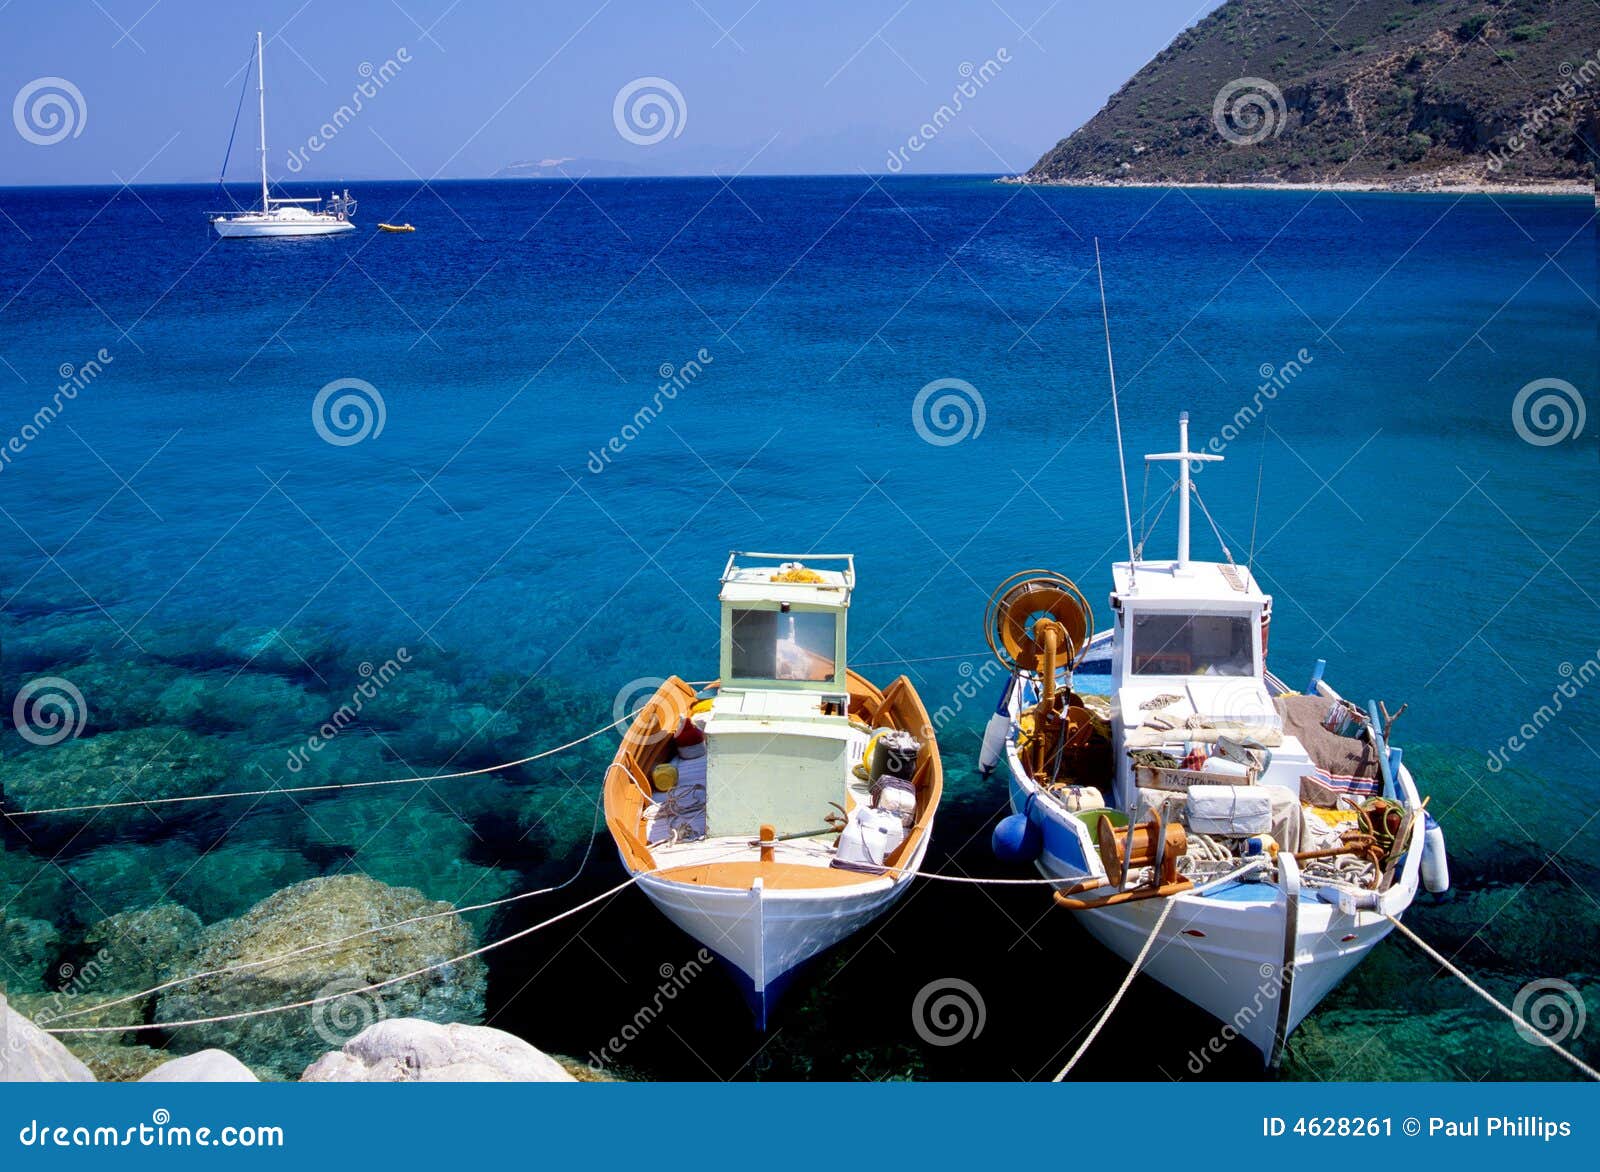 Two greek fishing boats with a sailboat passing.